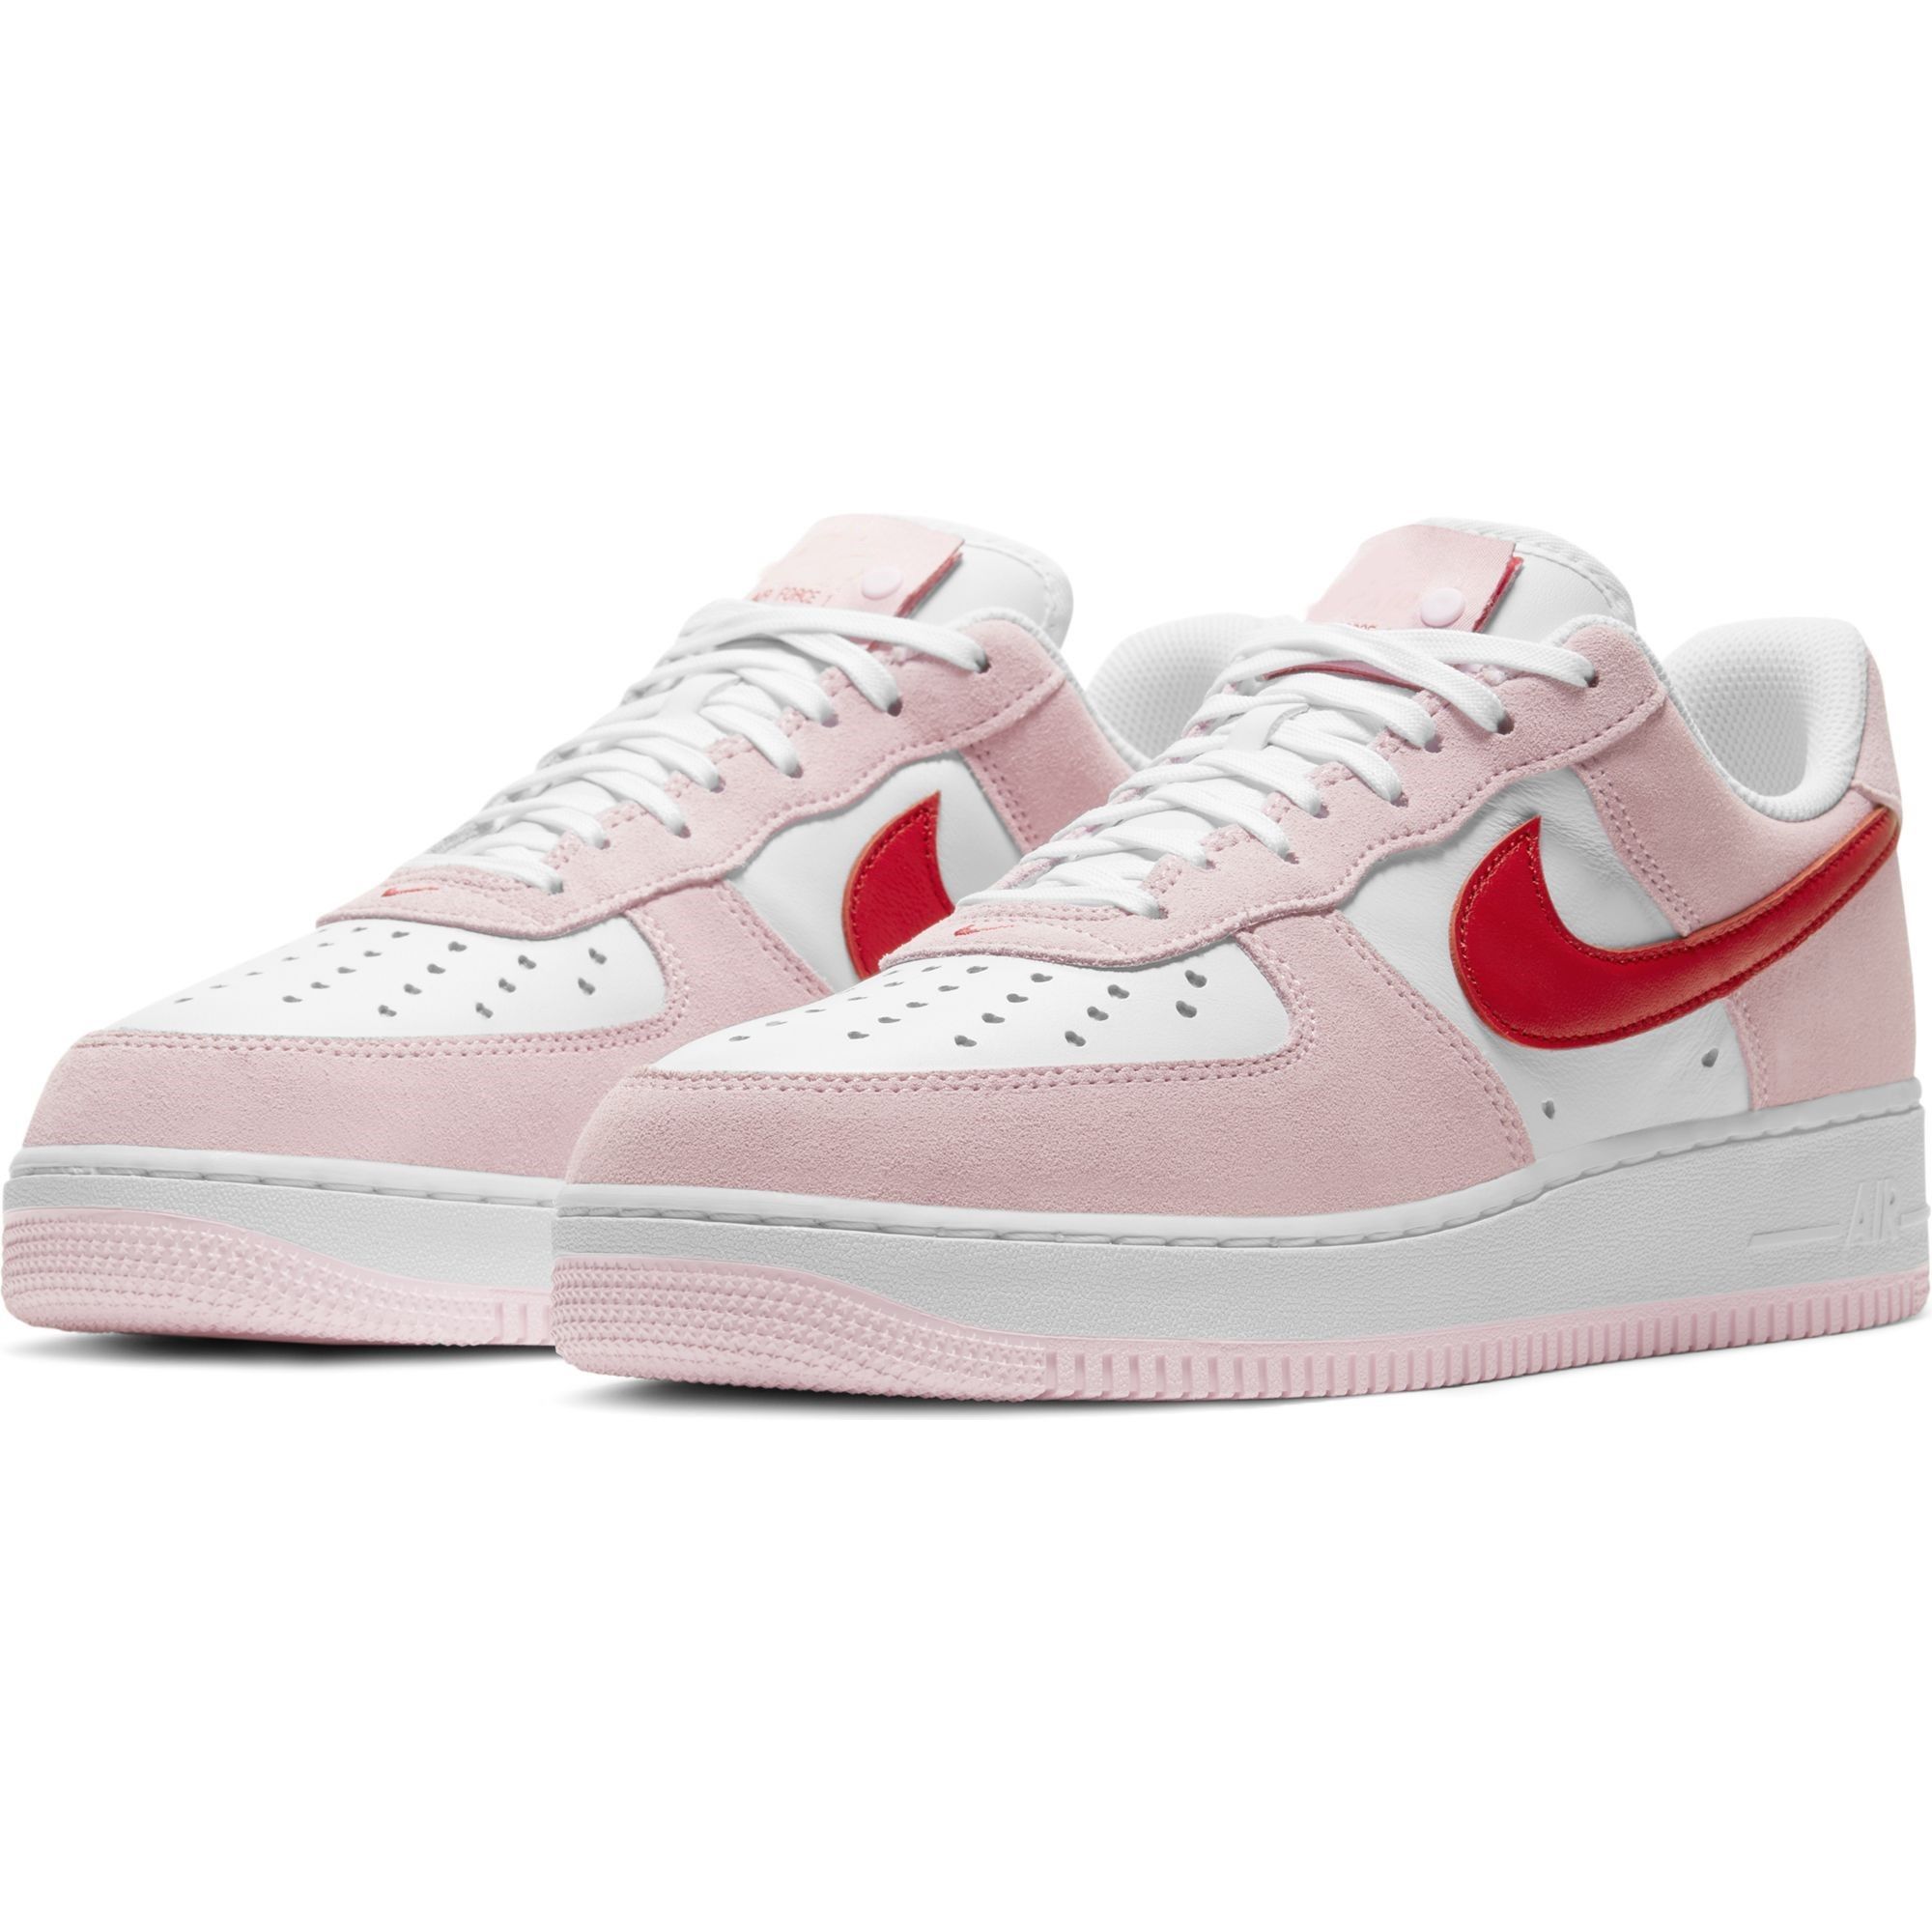 Air force valentines day. Кроссовки Air Force Nike 1 07 QS Valentine’s Day Love Letter. Nike Air Force 1 07 QS. Nike Air Force 1 Low “Valentine’s Day” 2023. Nike Air Force 1’07 “Valentines Day” (2021).